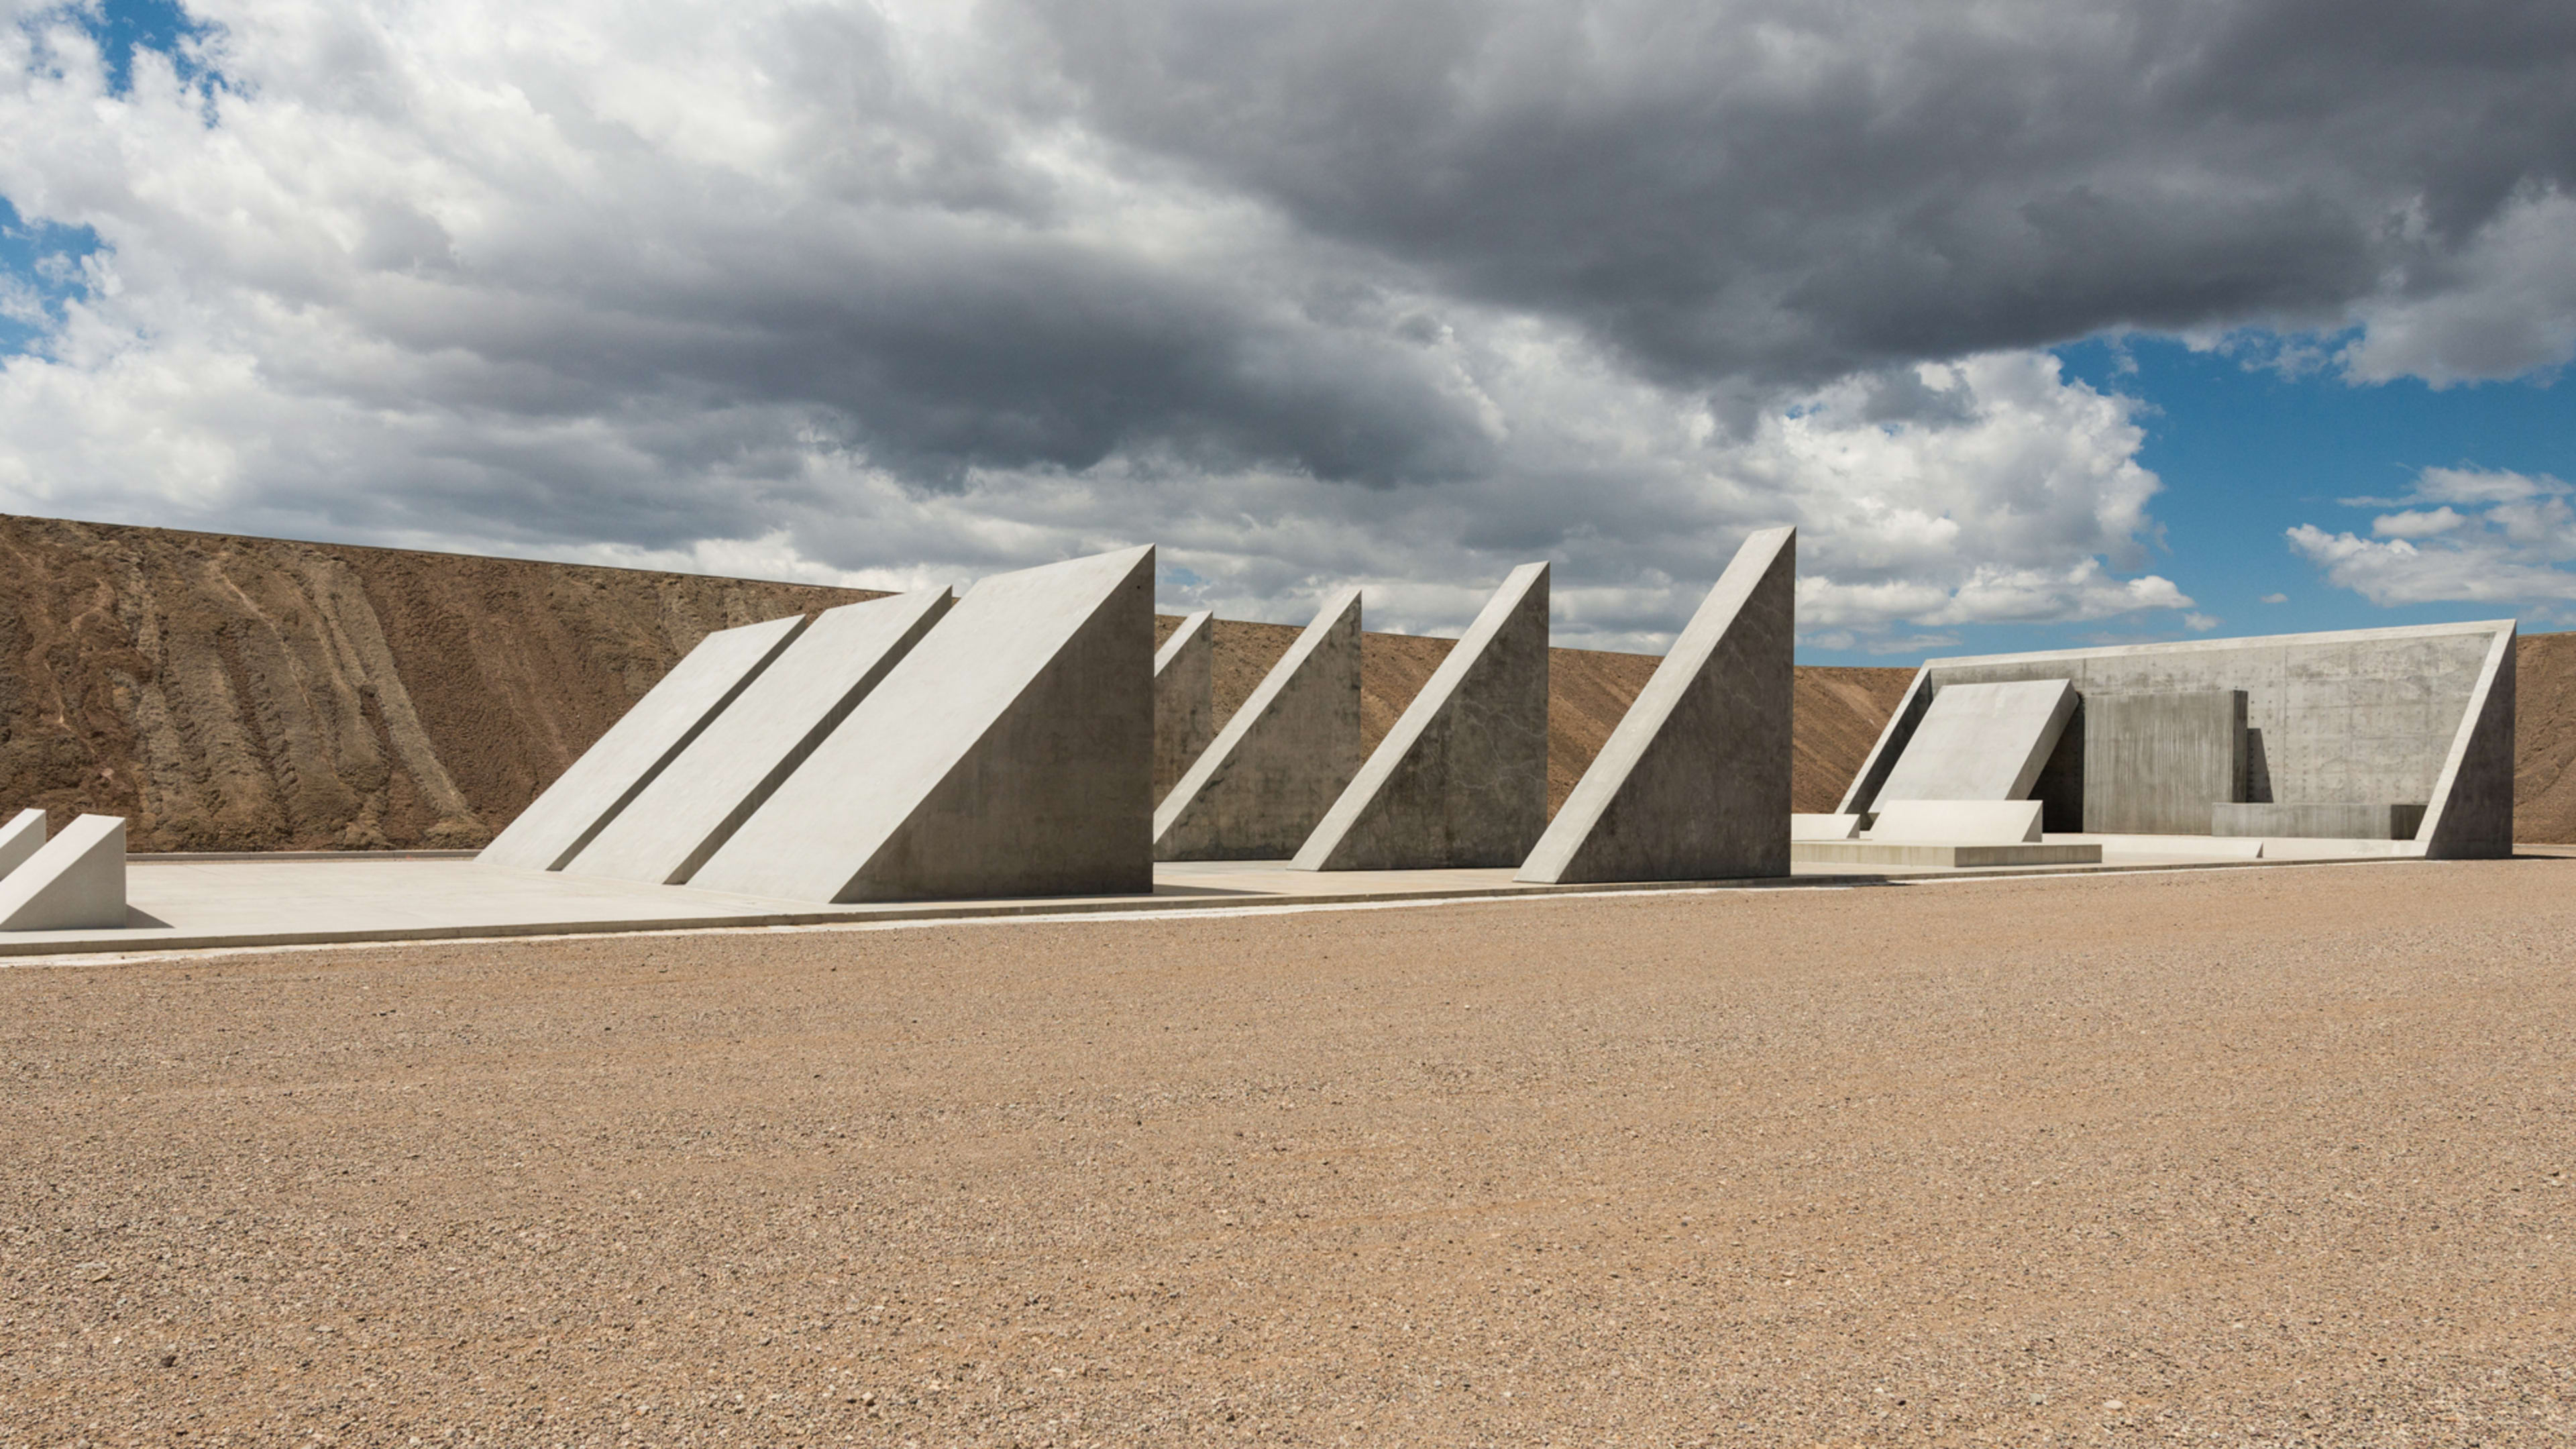 This $40 million, mile-long desert sculpture lets in only 6 visitors per day